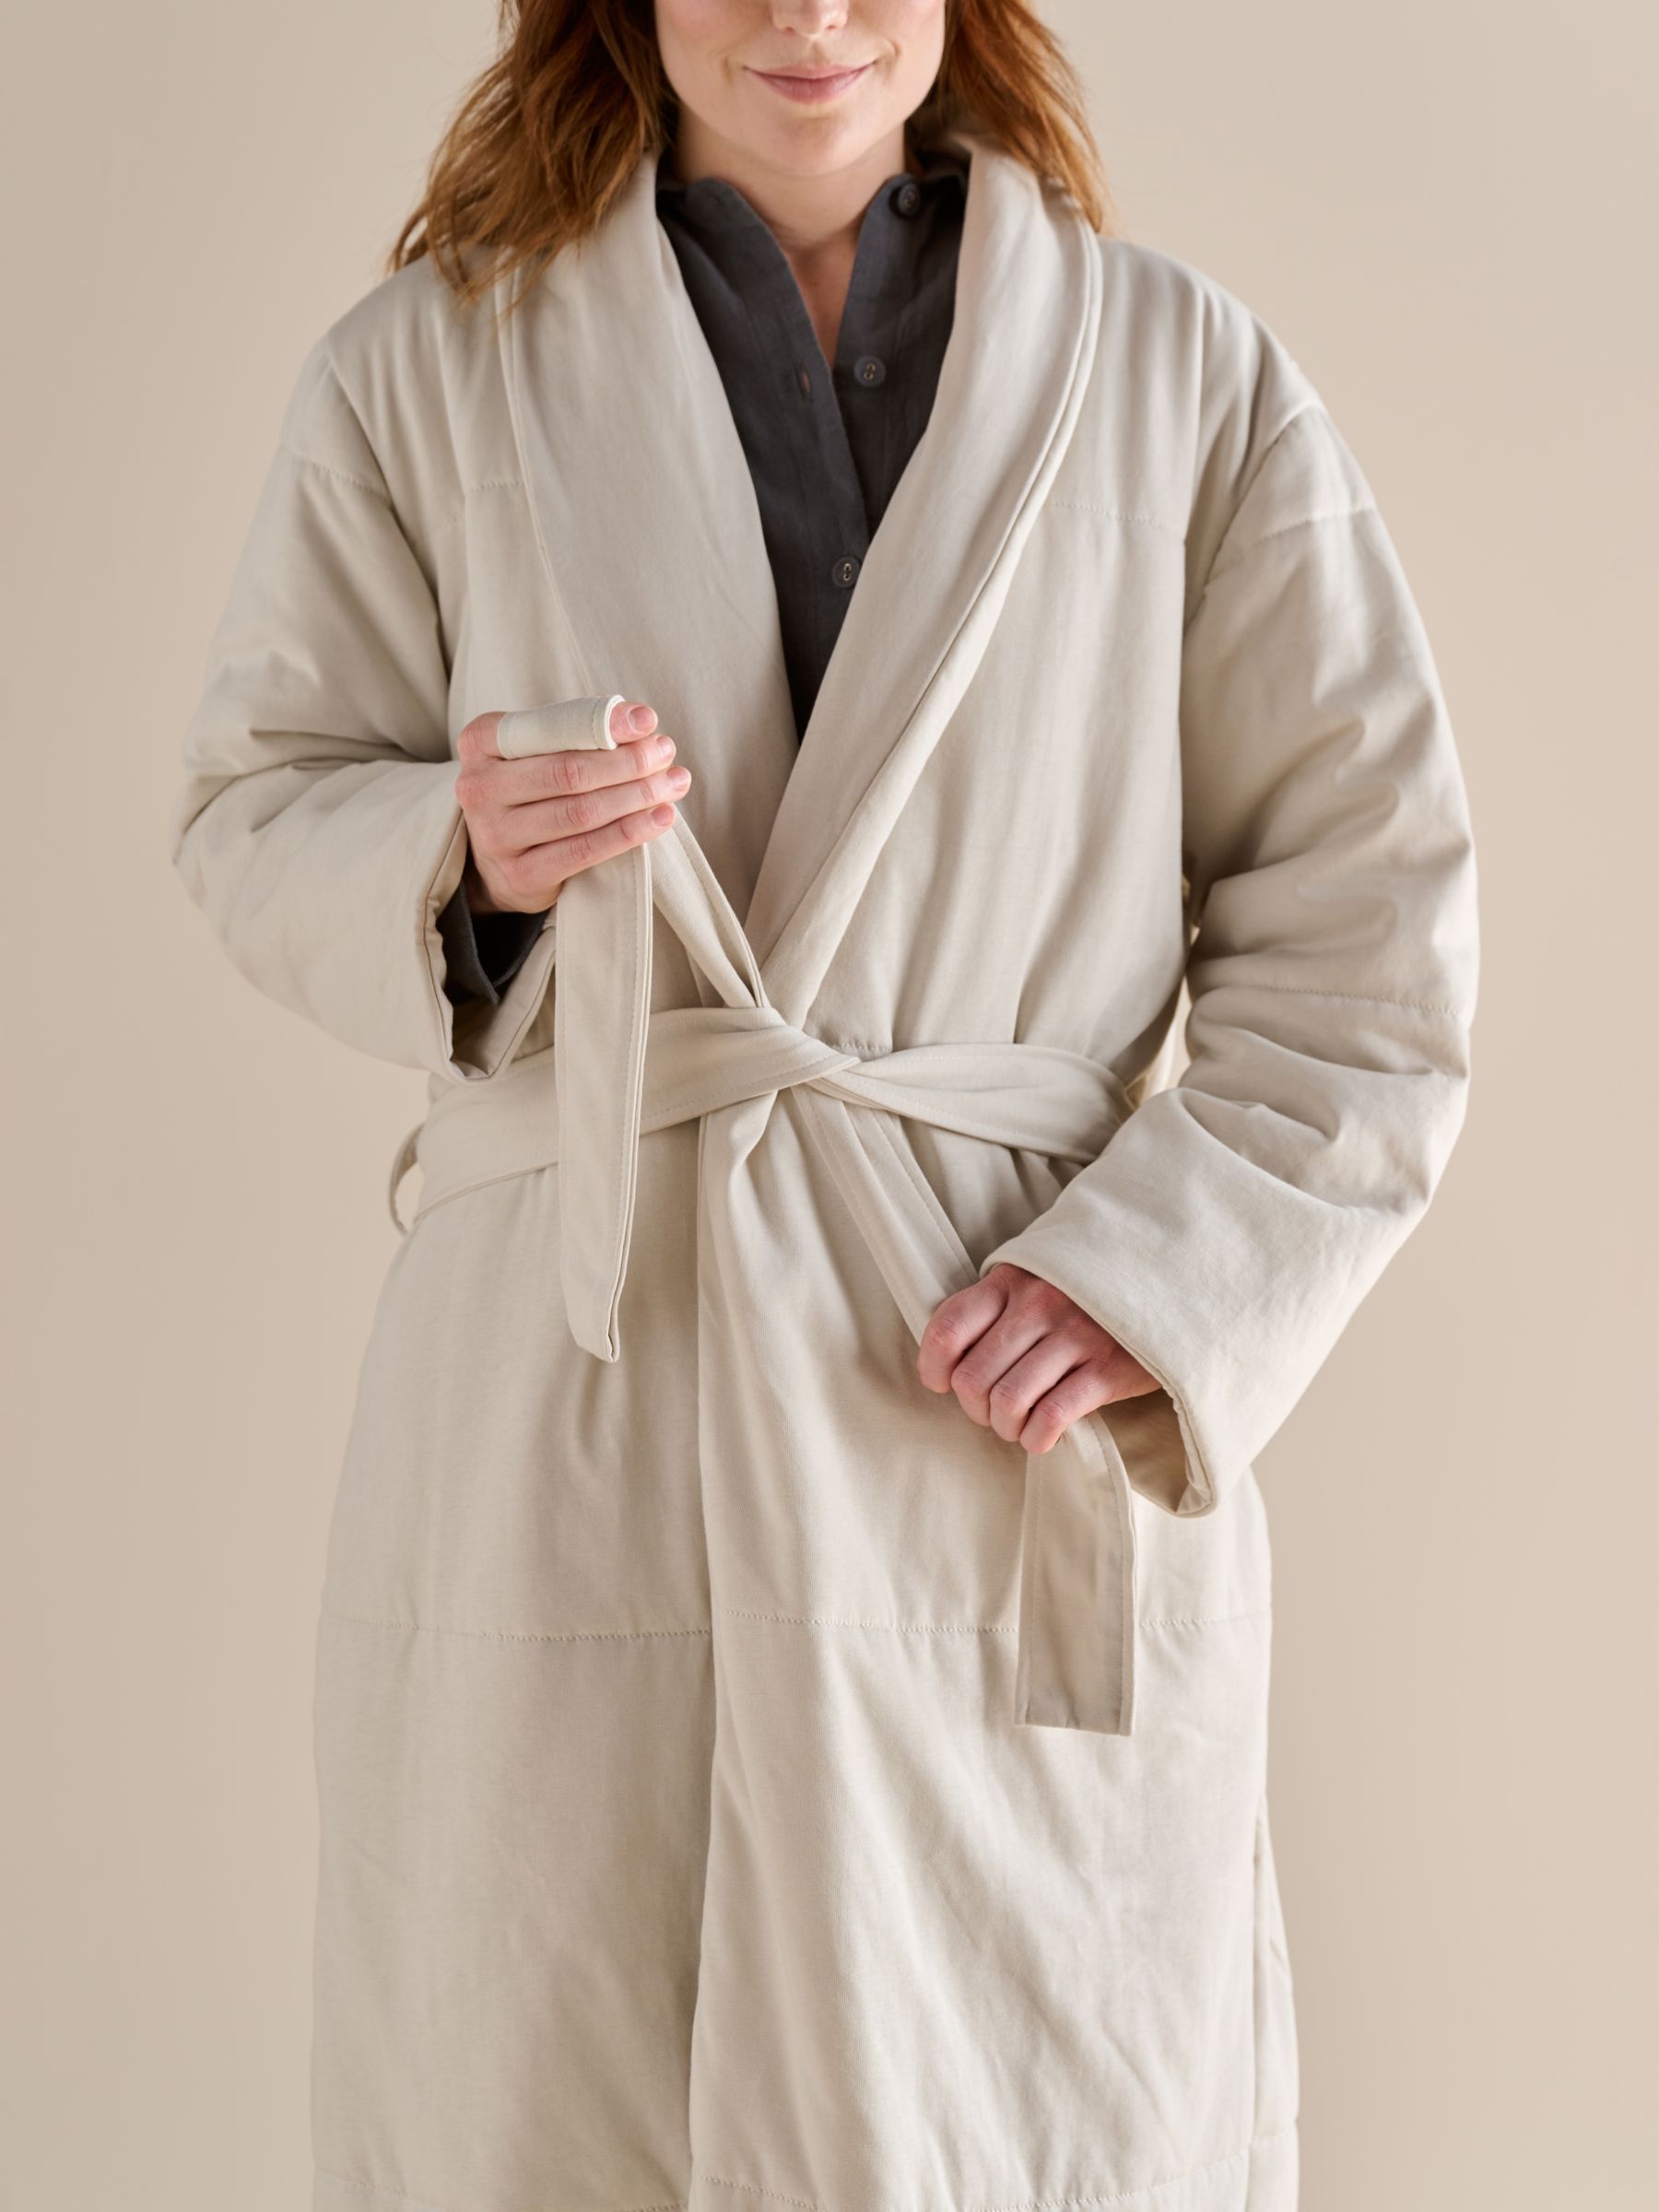 Buy Bedfolk Housecoat Cotton Dressing Gown Robe, Clay Online at johnlewis.com